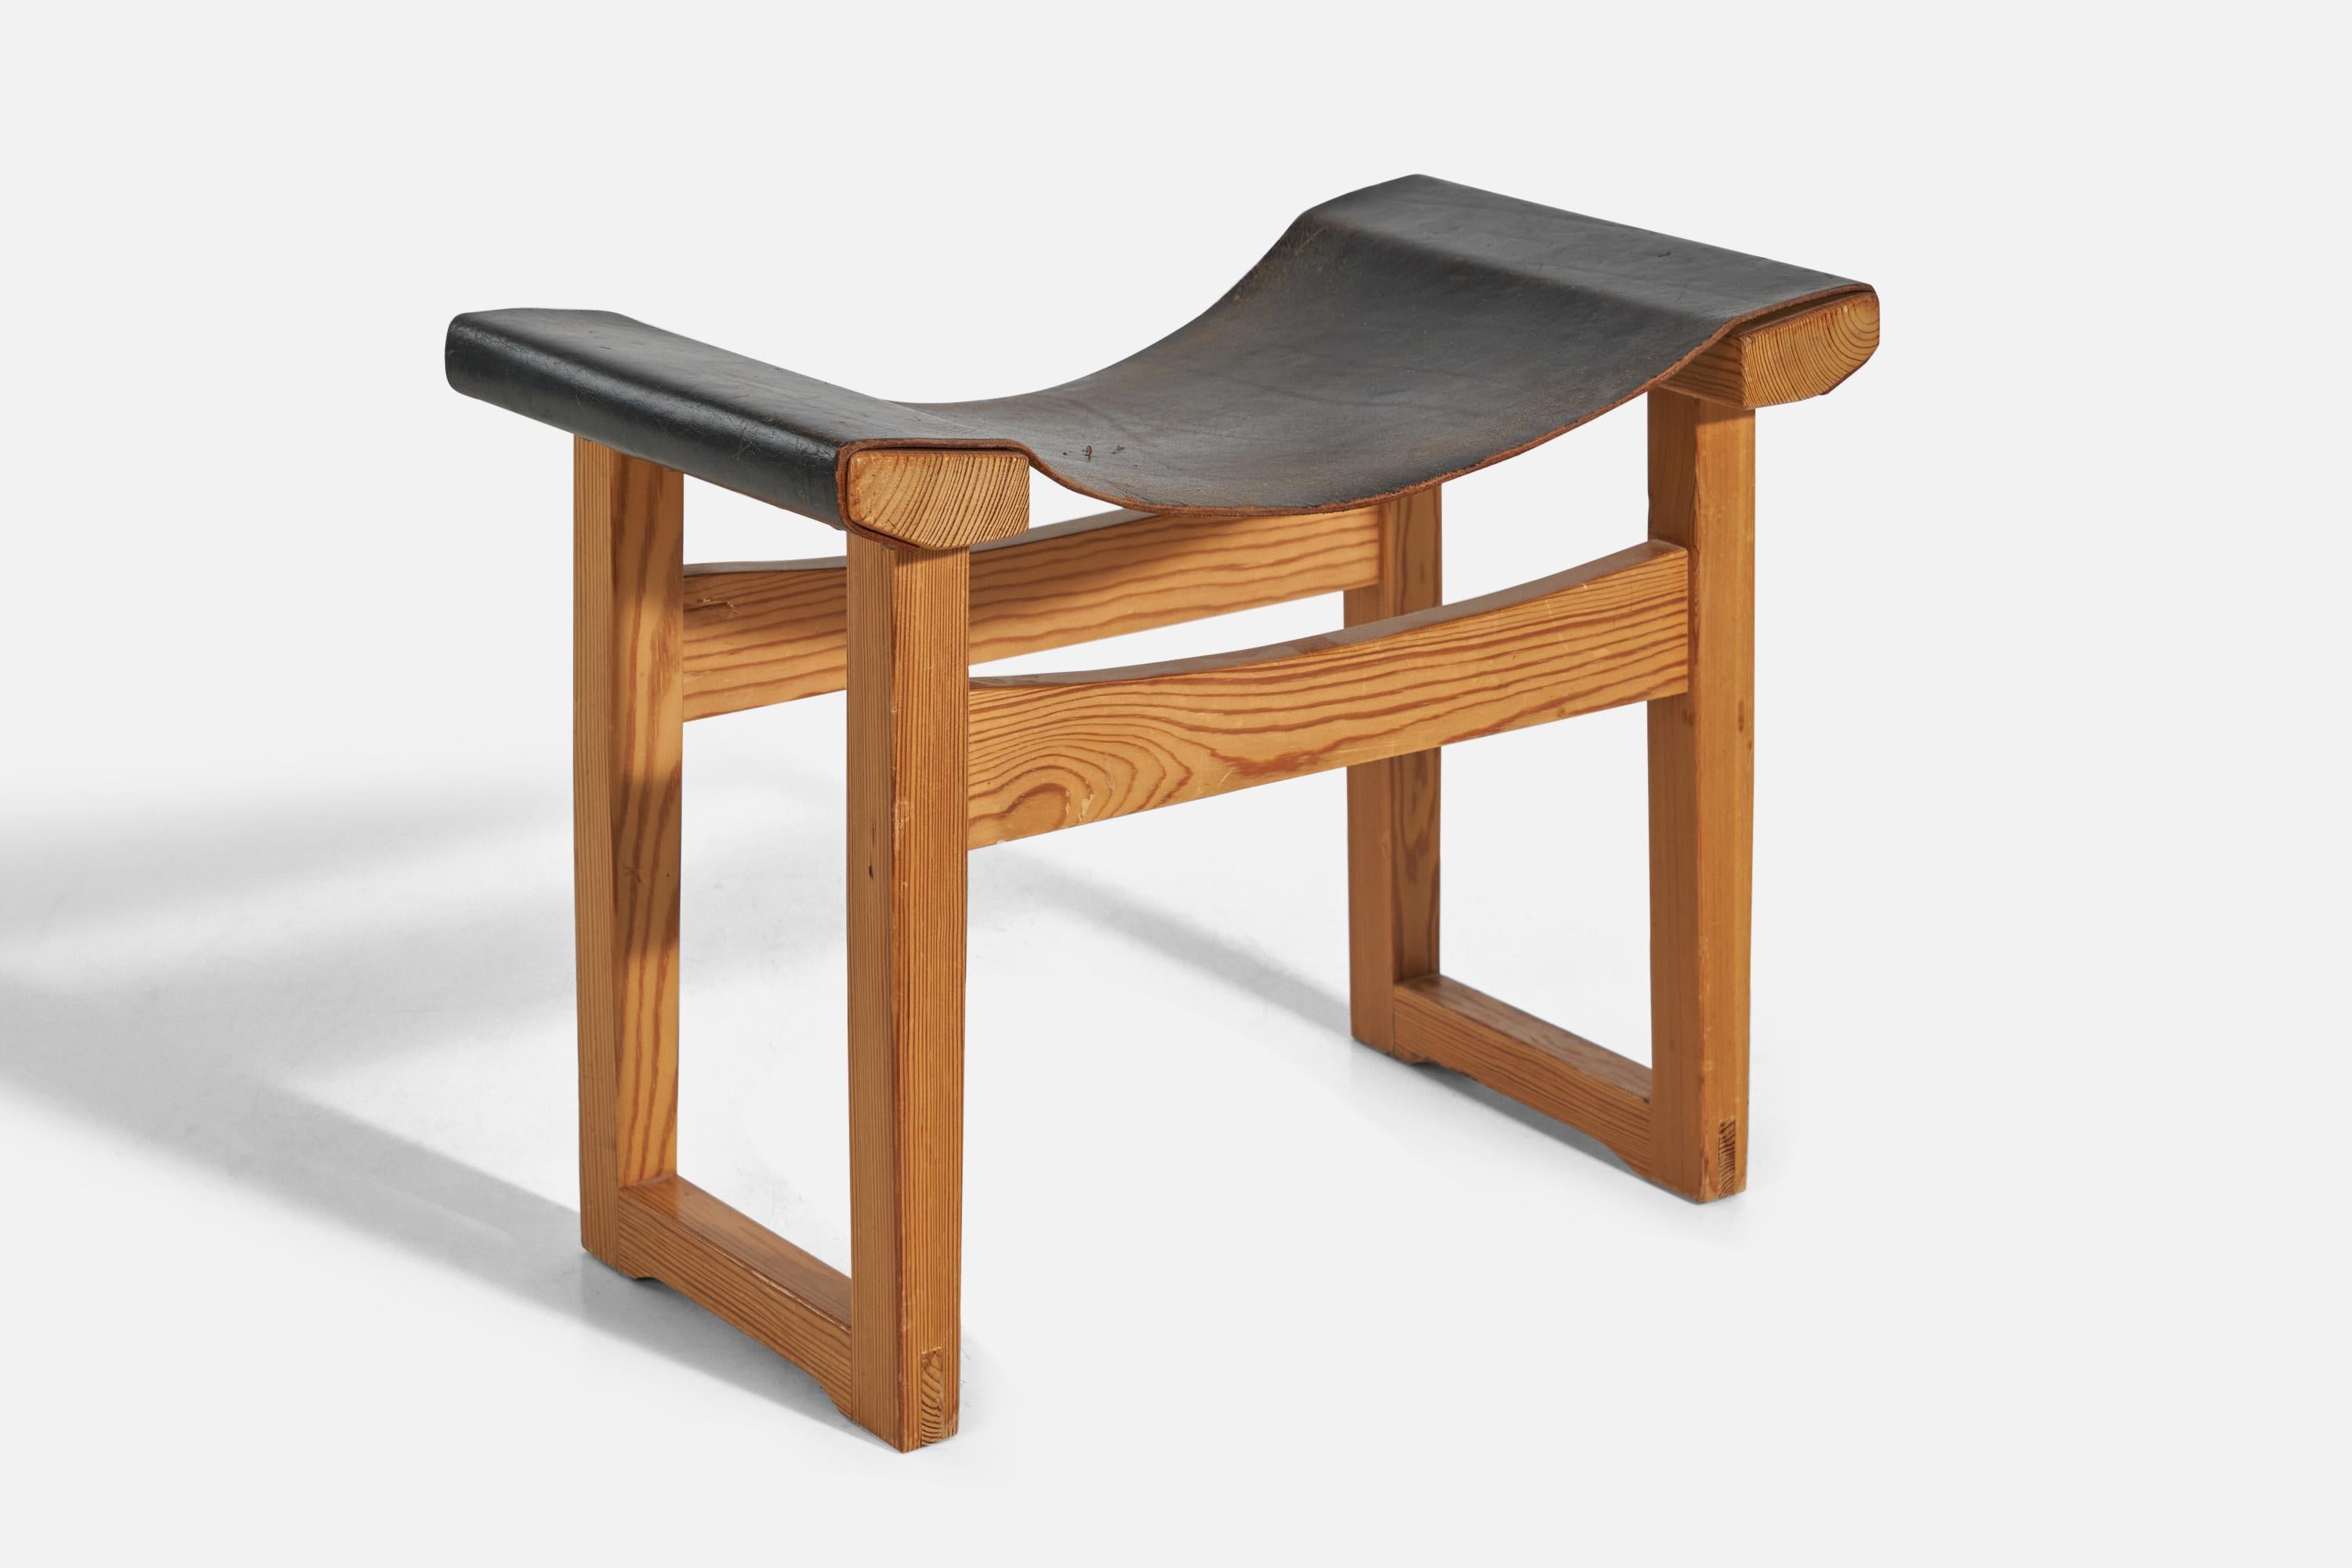 A pine and black-dyed leather stool designed and produced in Sweden, 1960s.